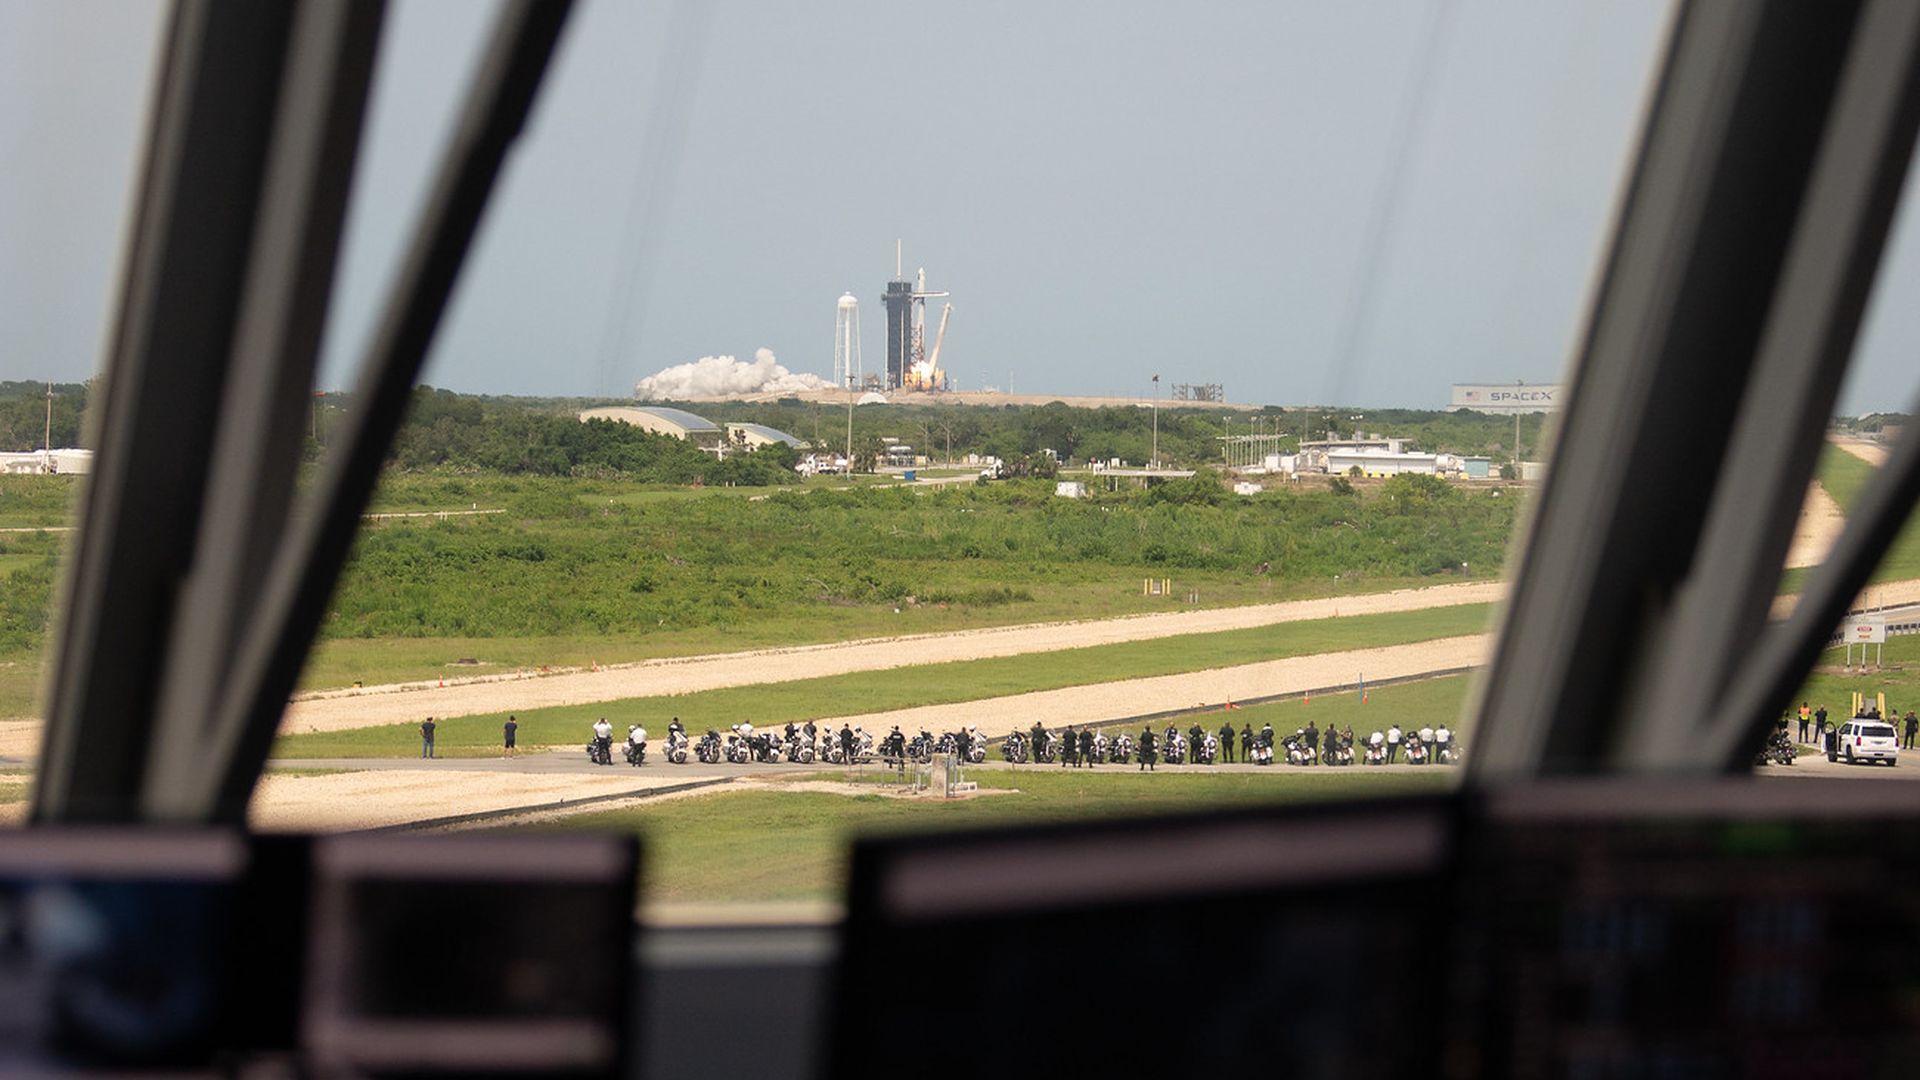 A Falcon 9 rocket launch seen from Mission Control.